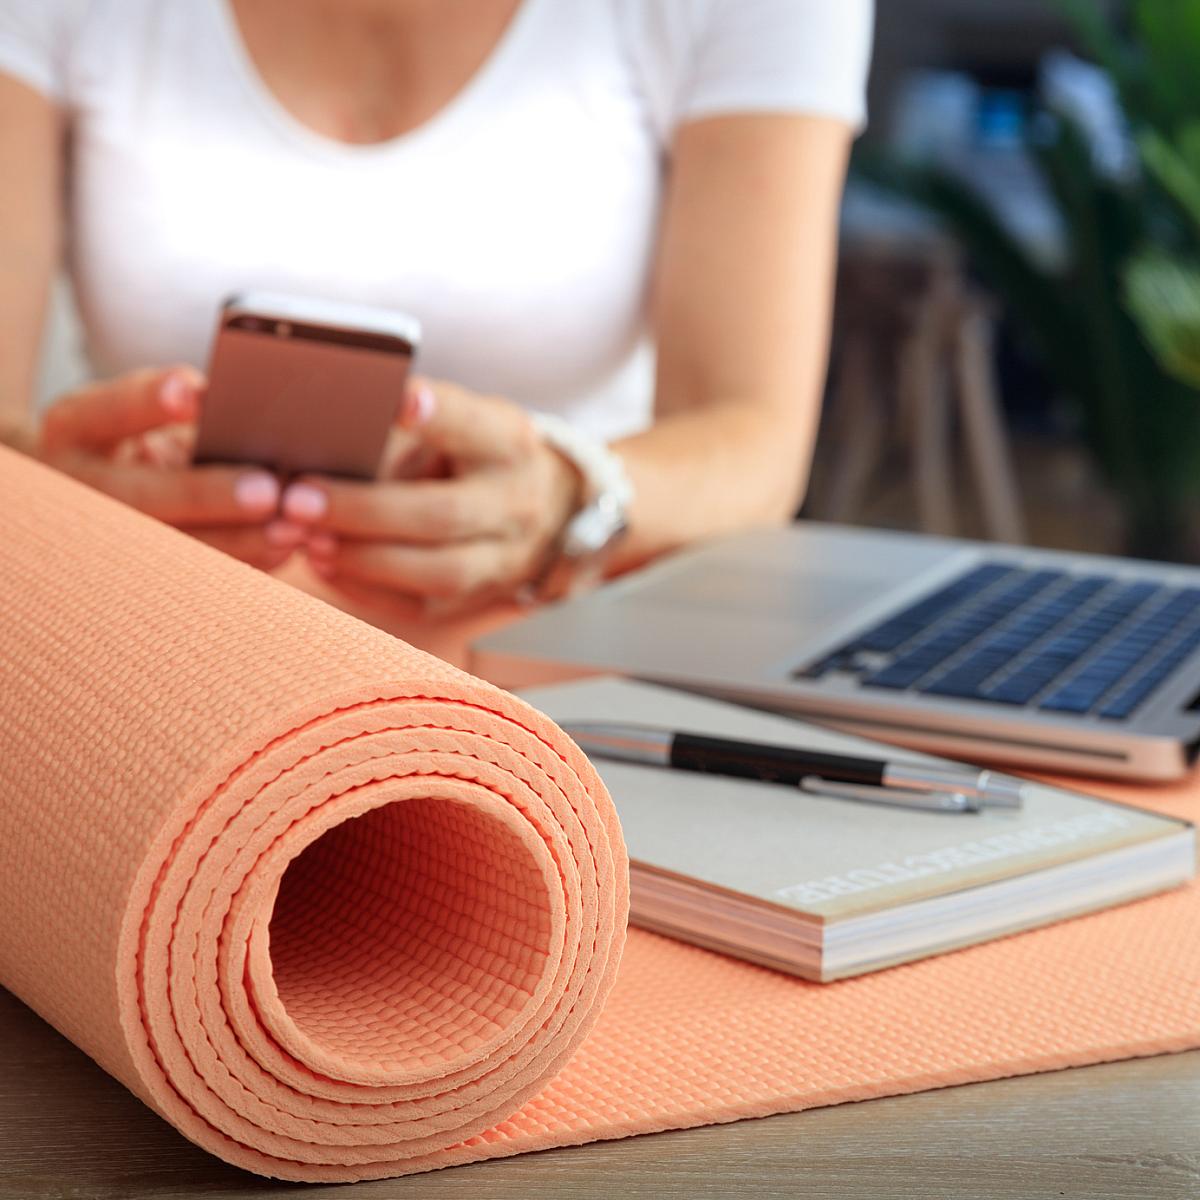 Woman checks her phone in front of an open laptop and notebook. She has a rolled up peach yoga mat on her desk.